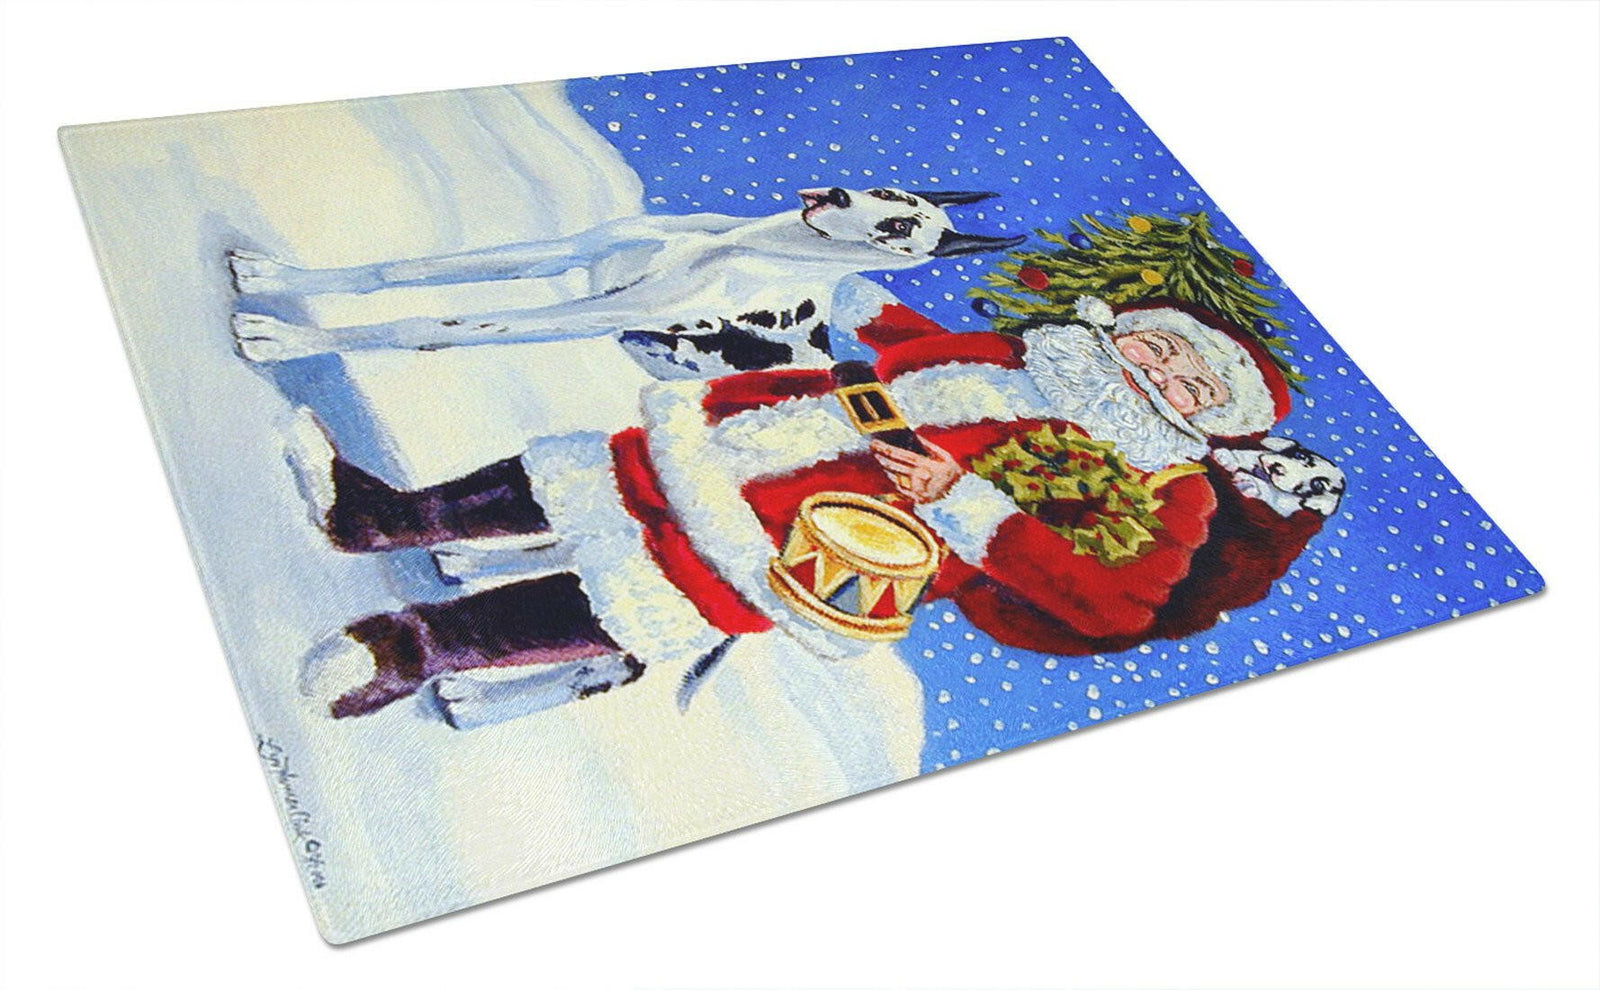 Harlequin Great Dane with Santa Claus Glass Cutting Board Large by Caroline's Treasures